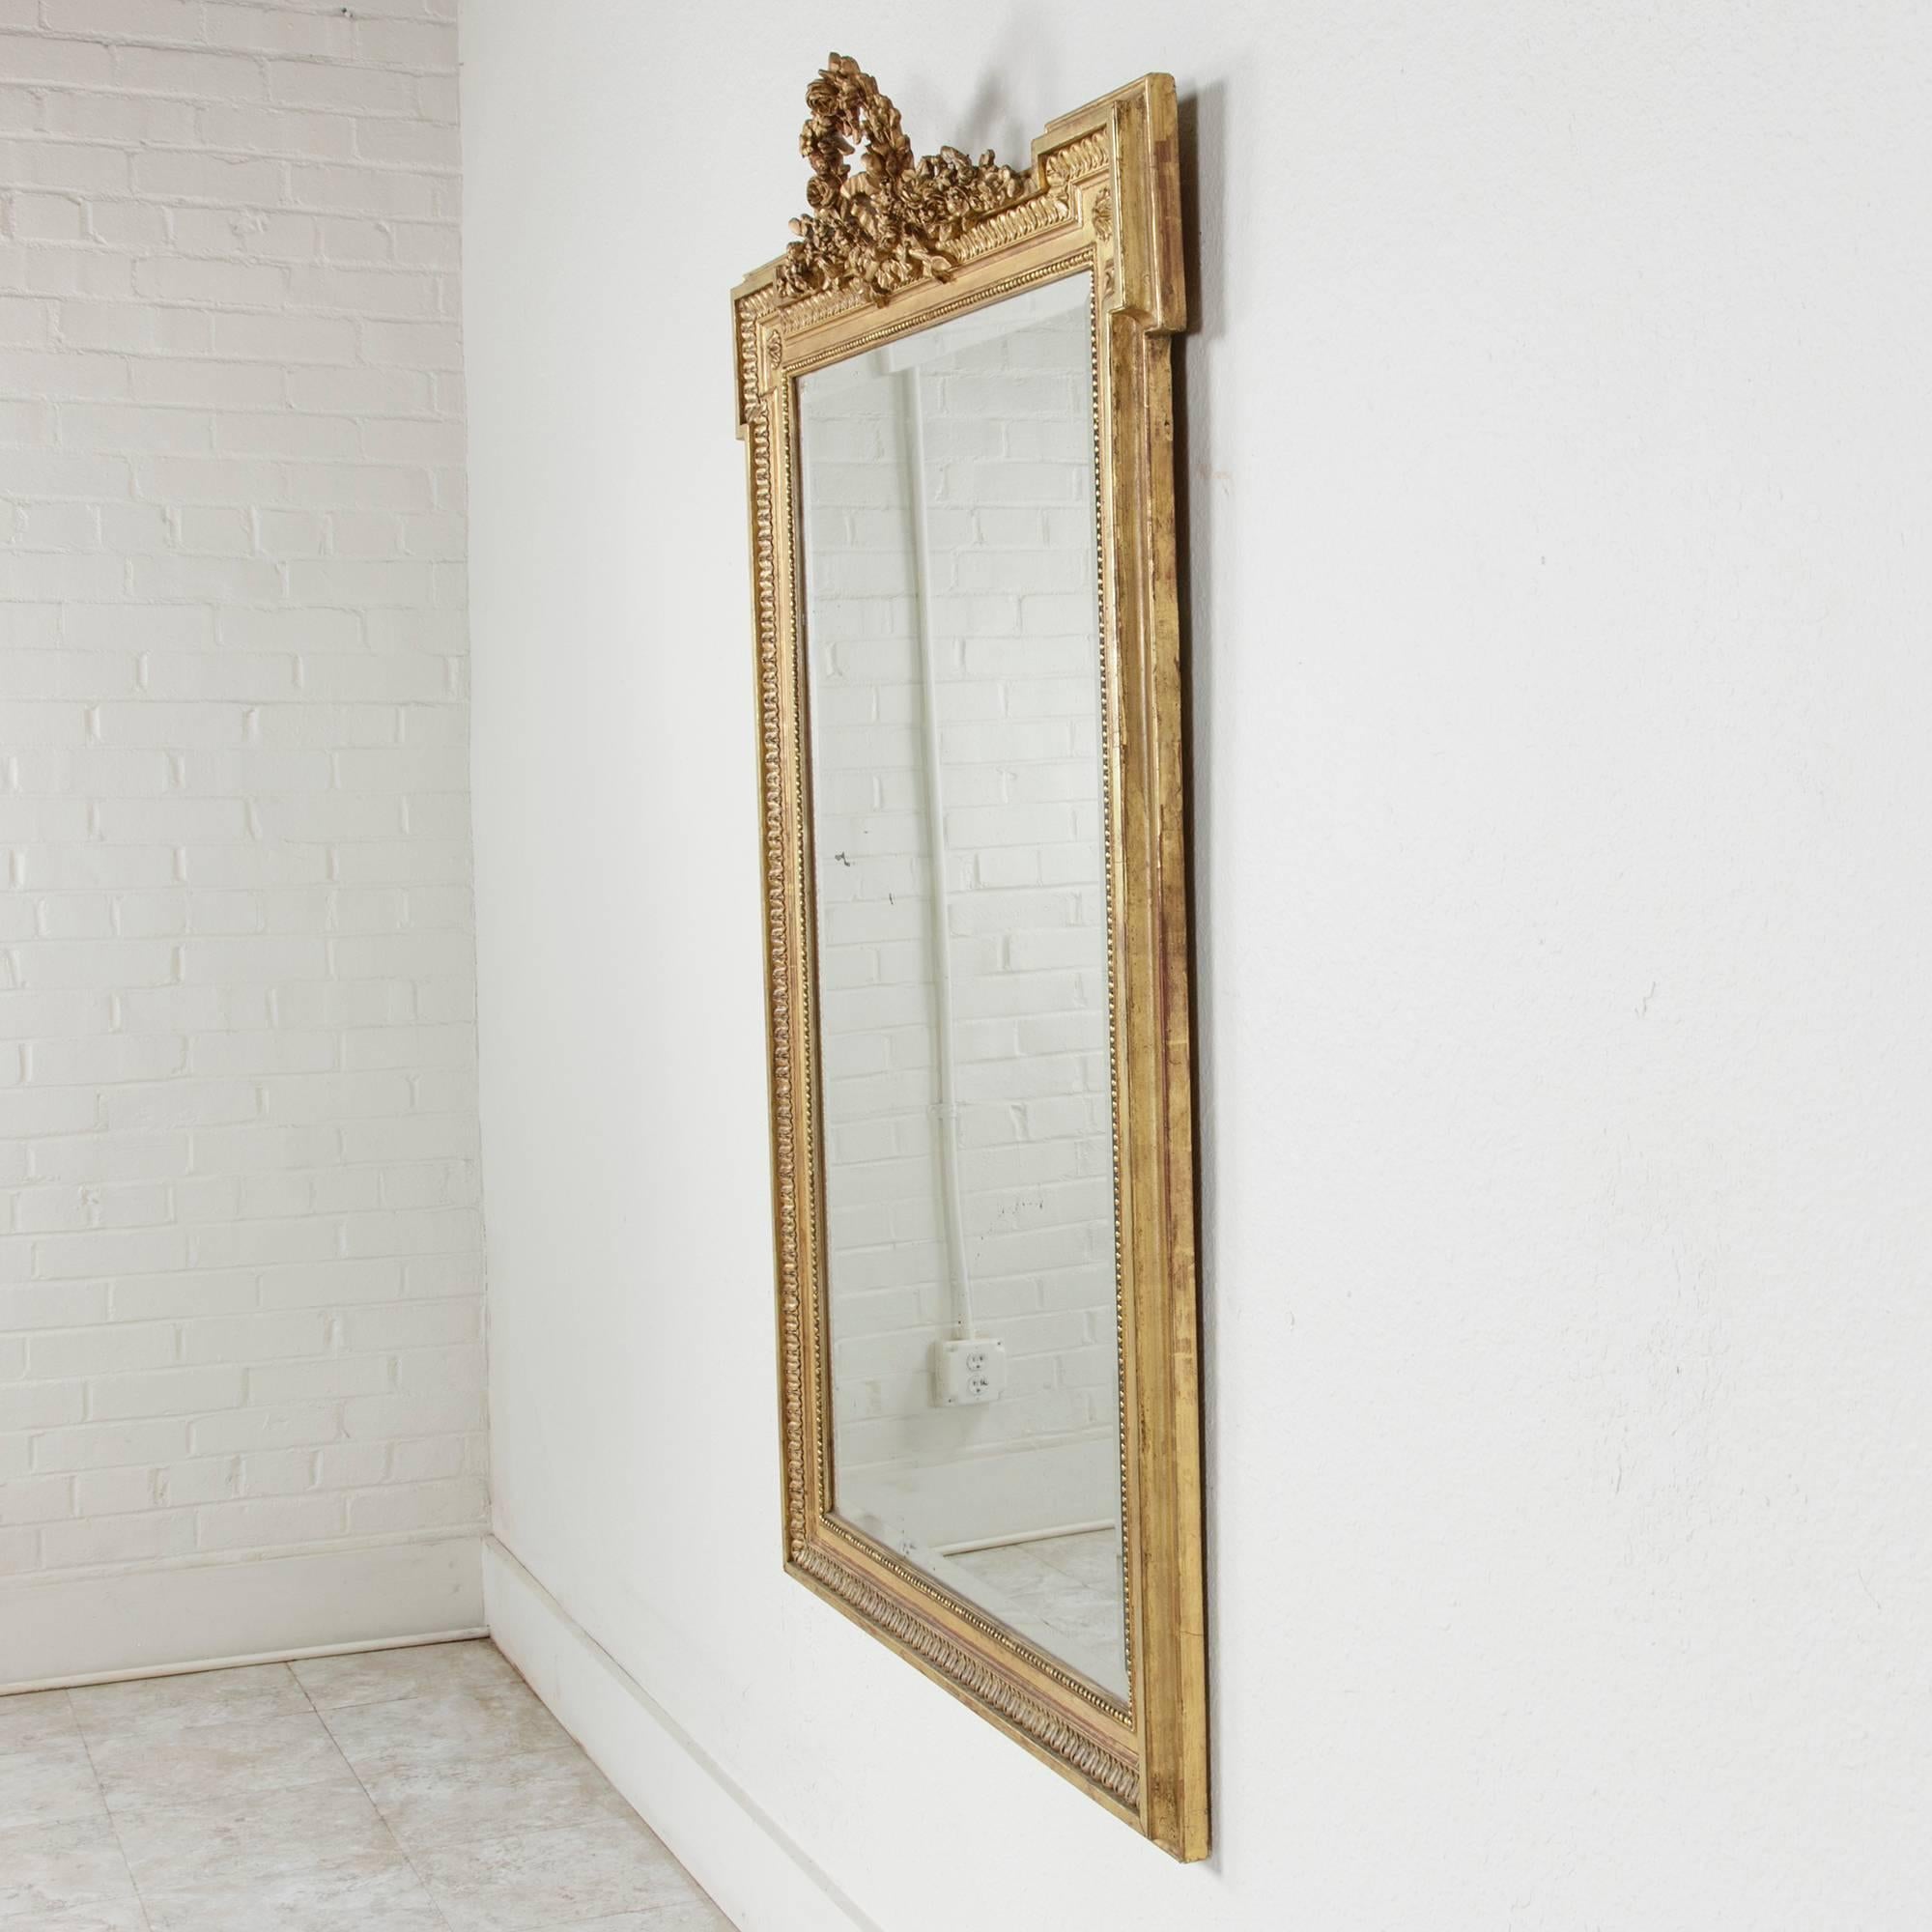 Late 19th Century Large 19th Century Louis XVI Style Giltwood Mirror with Original Beveled Glass